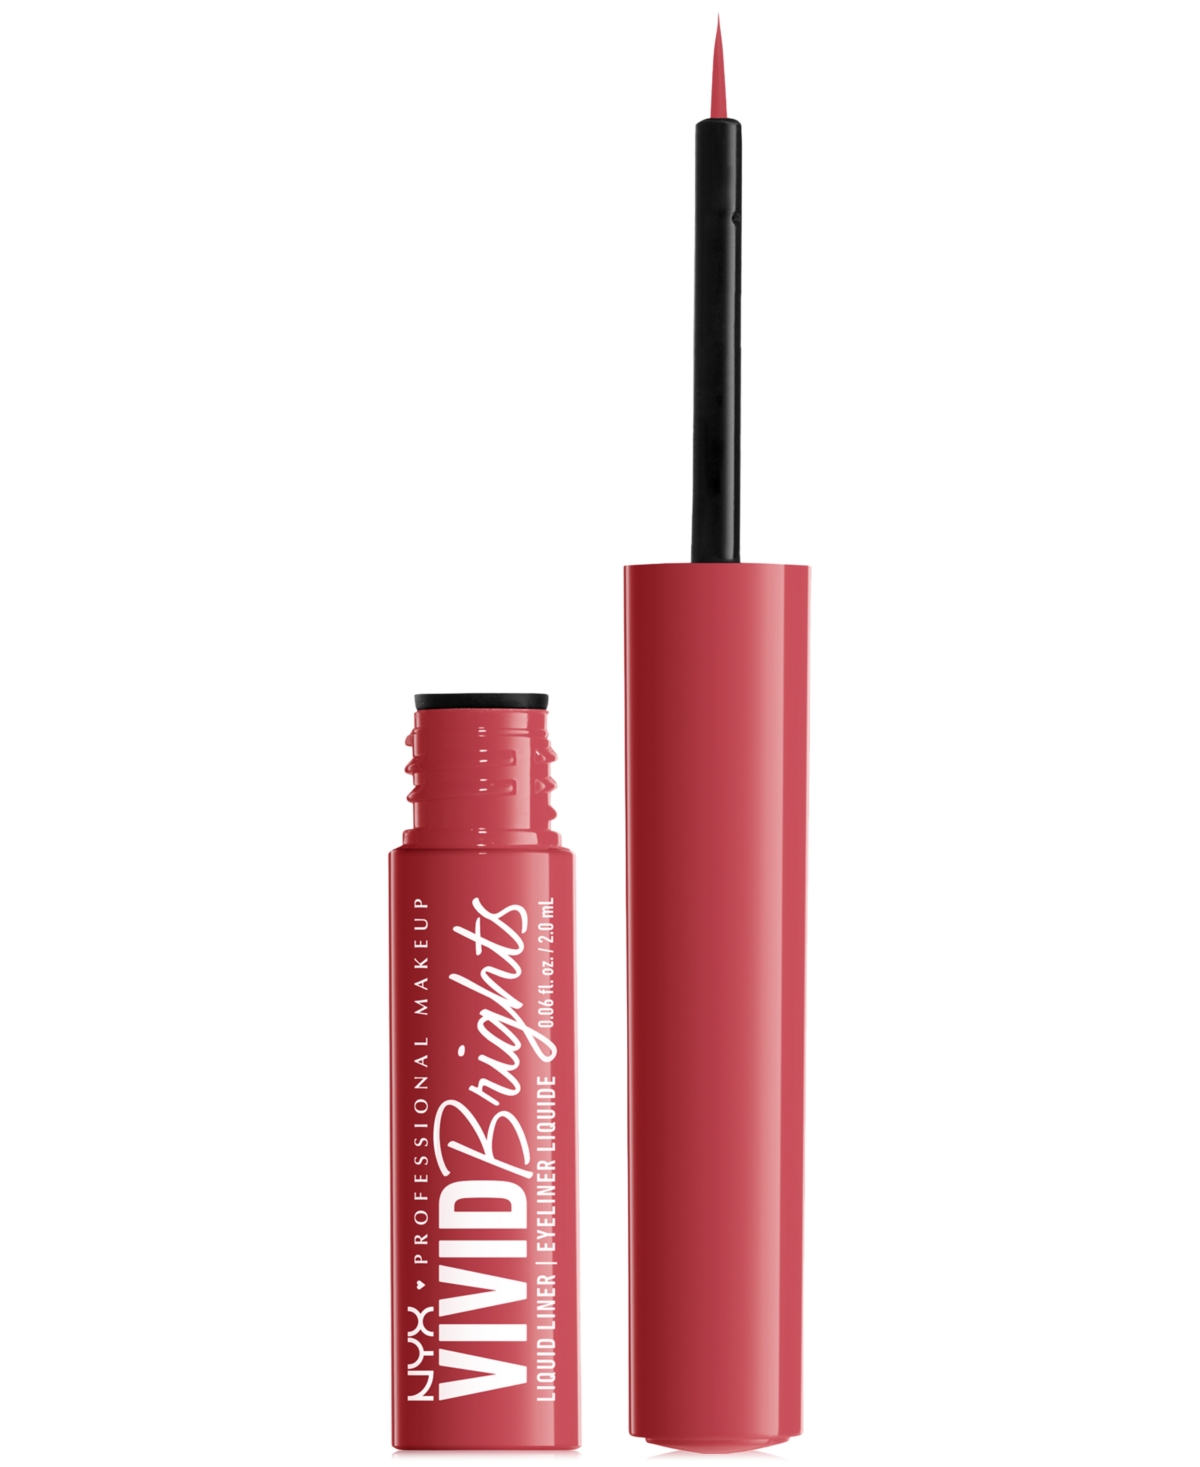 Nyx Professional Makeup Vivid Brights Liquid Liner In On Red